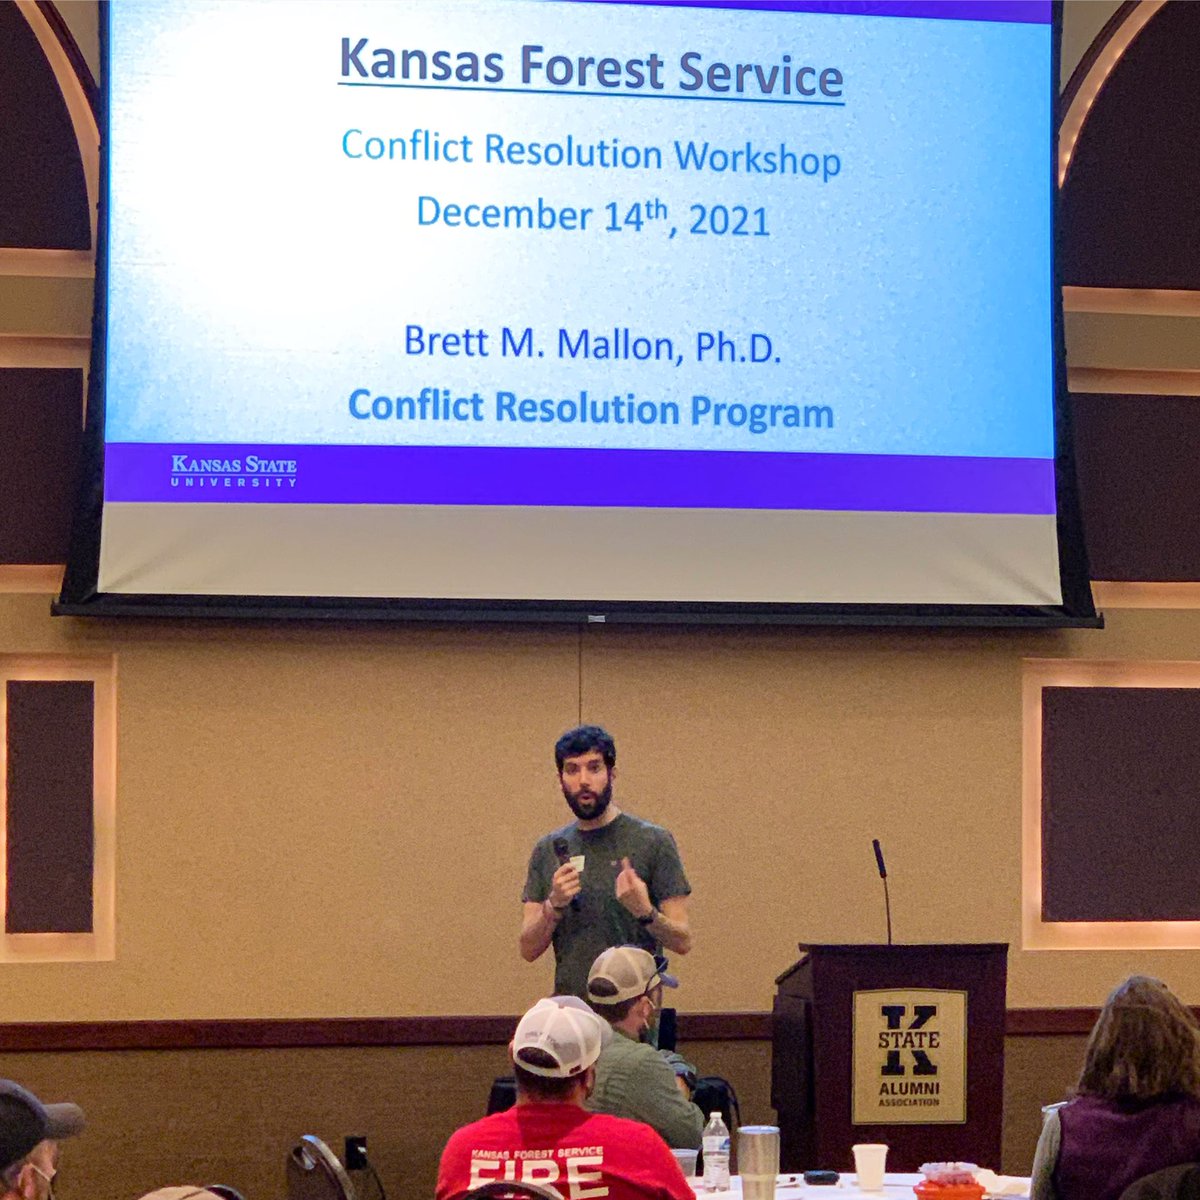 I feel fortunate to have the chance to engage with so many different groups and this week included a bunch of great people from the KFS. Community engagement has always been my favorite aspect of my conflict res work! #KStateCNRES #LandGrantUniversity 💜🕊